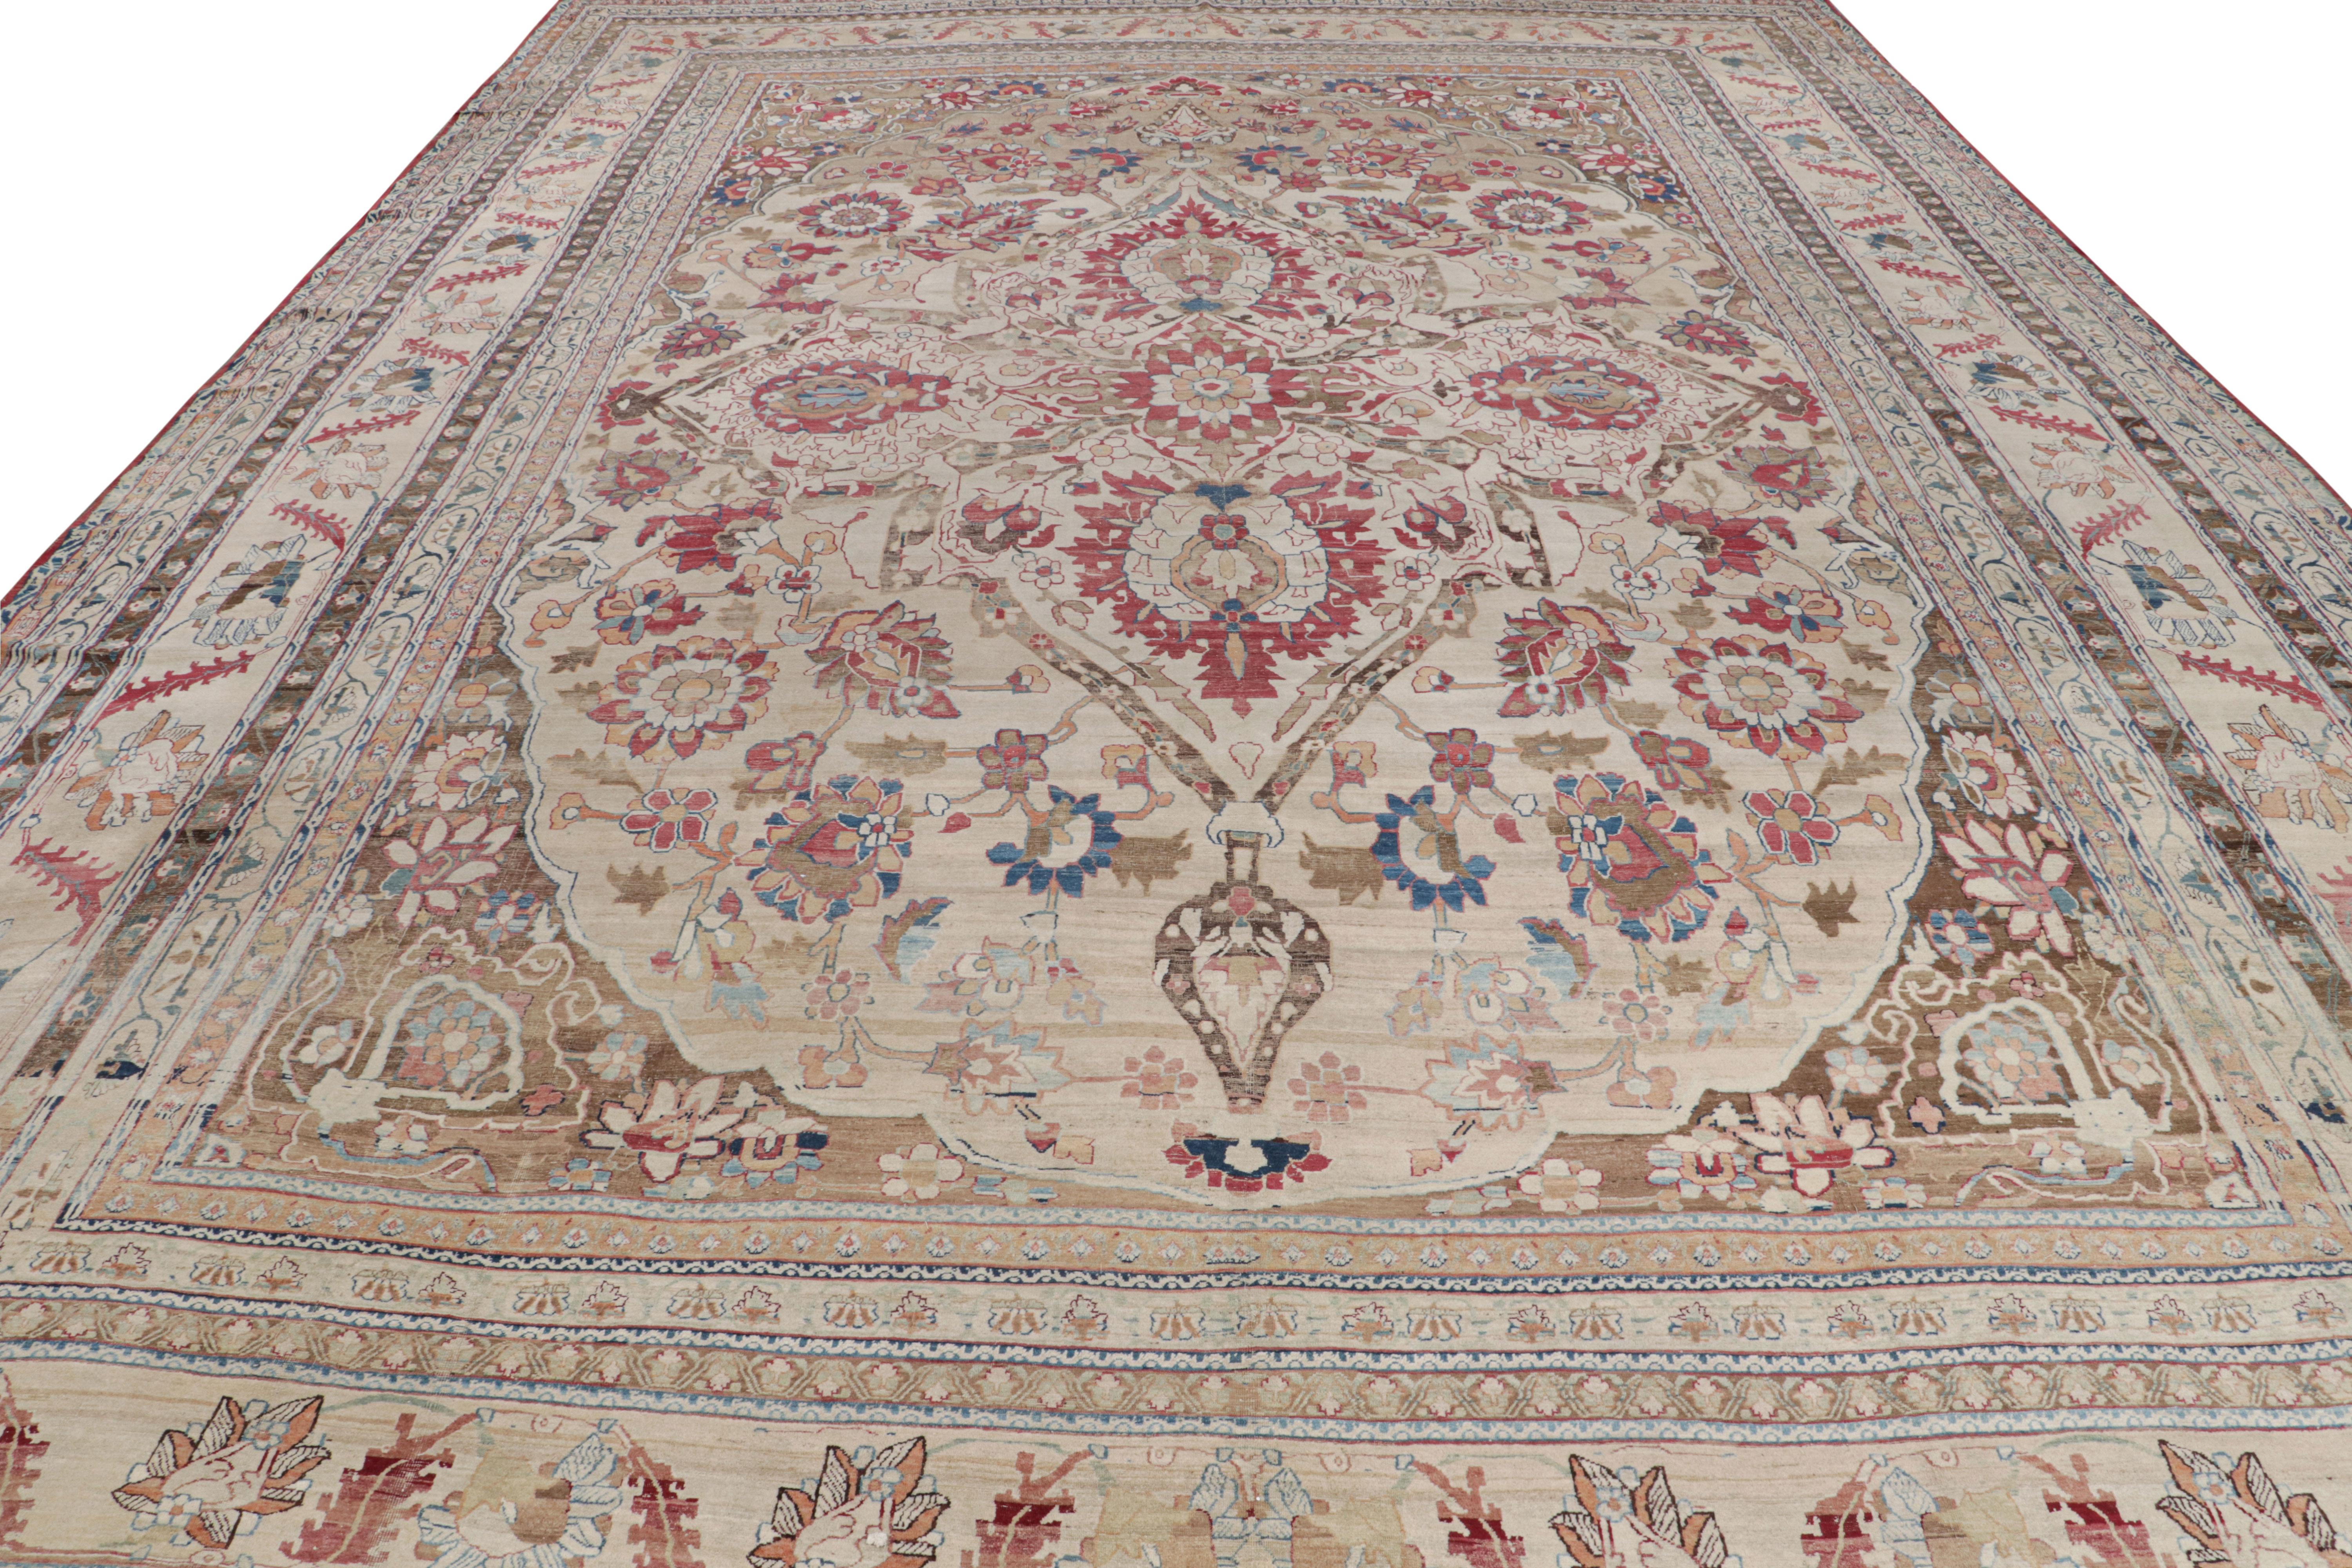 Late 19th Century Oversized Antique Persian Kermanshah Rug with Floral Patterns For Sale